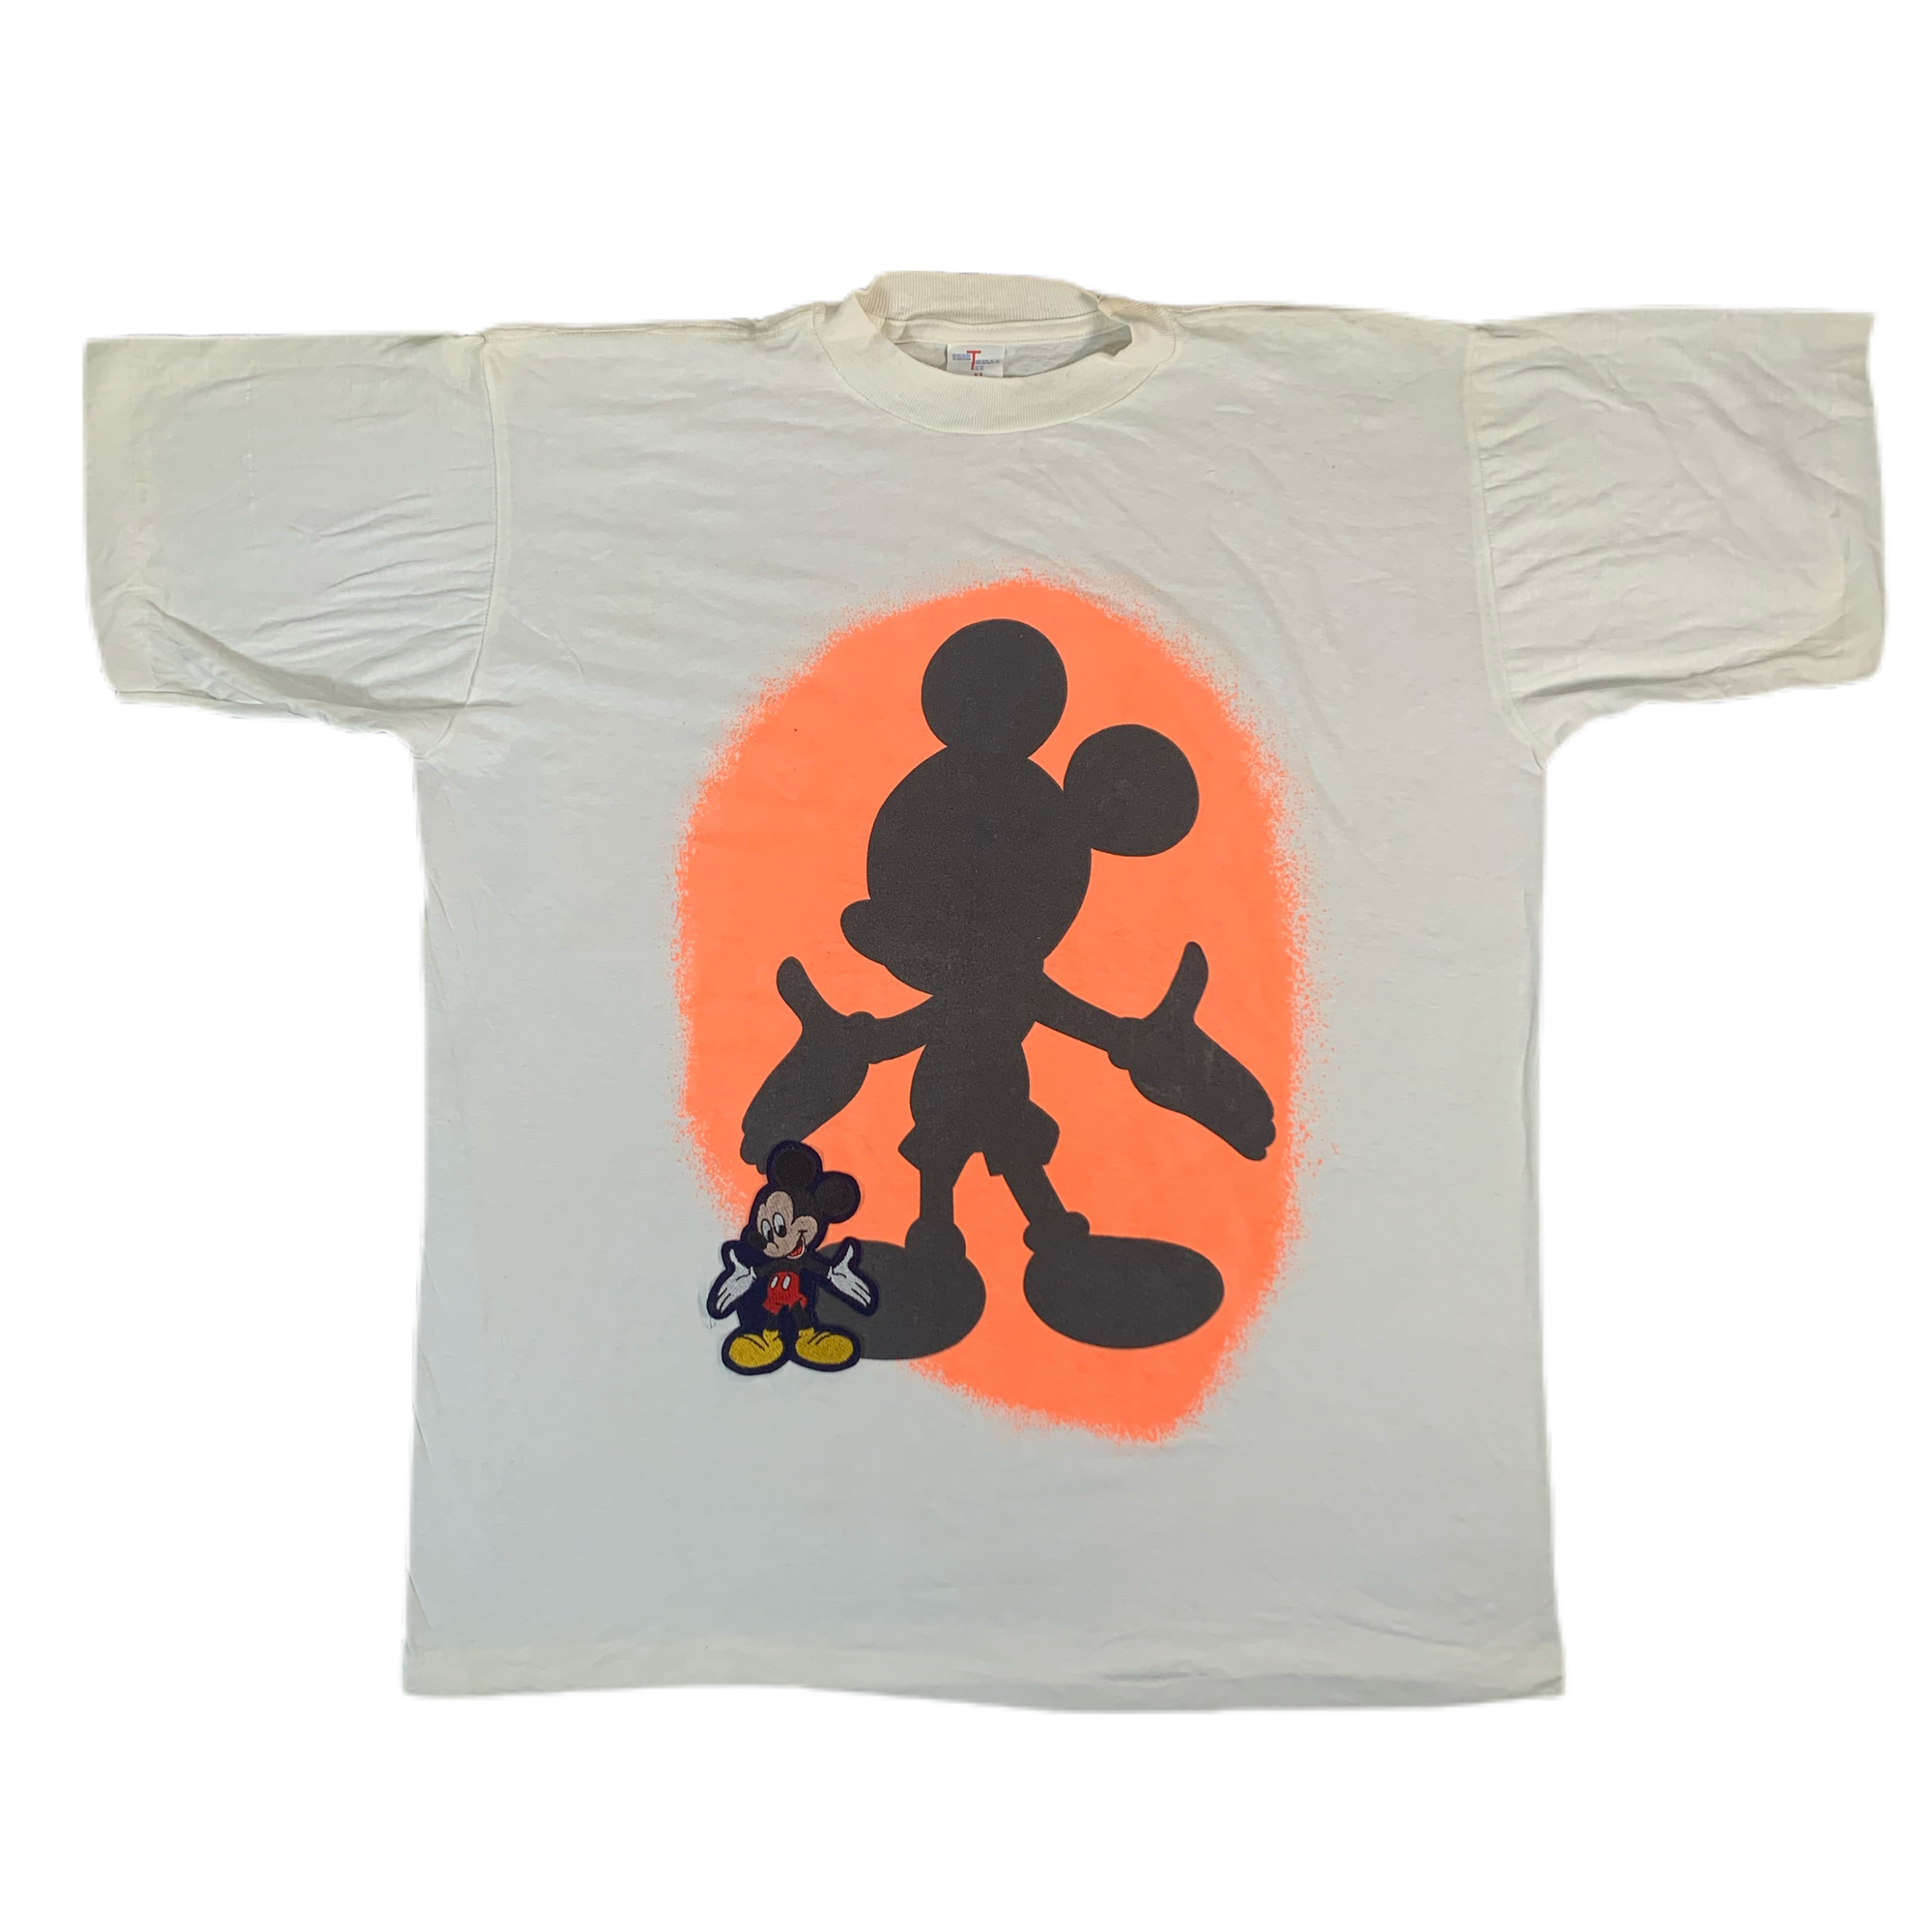 Vintage Mickey Mouse "Shadow" T-Shirt - jointcustodydc